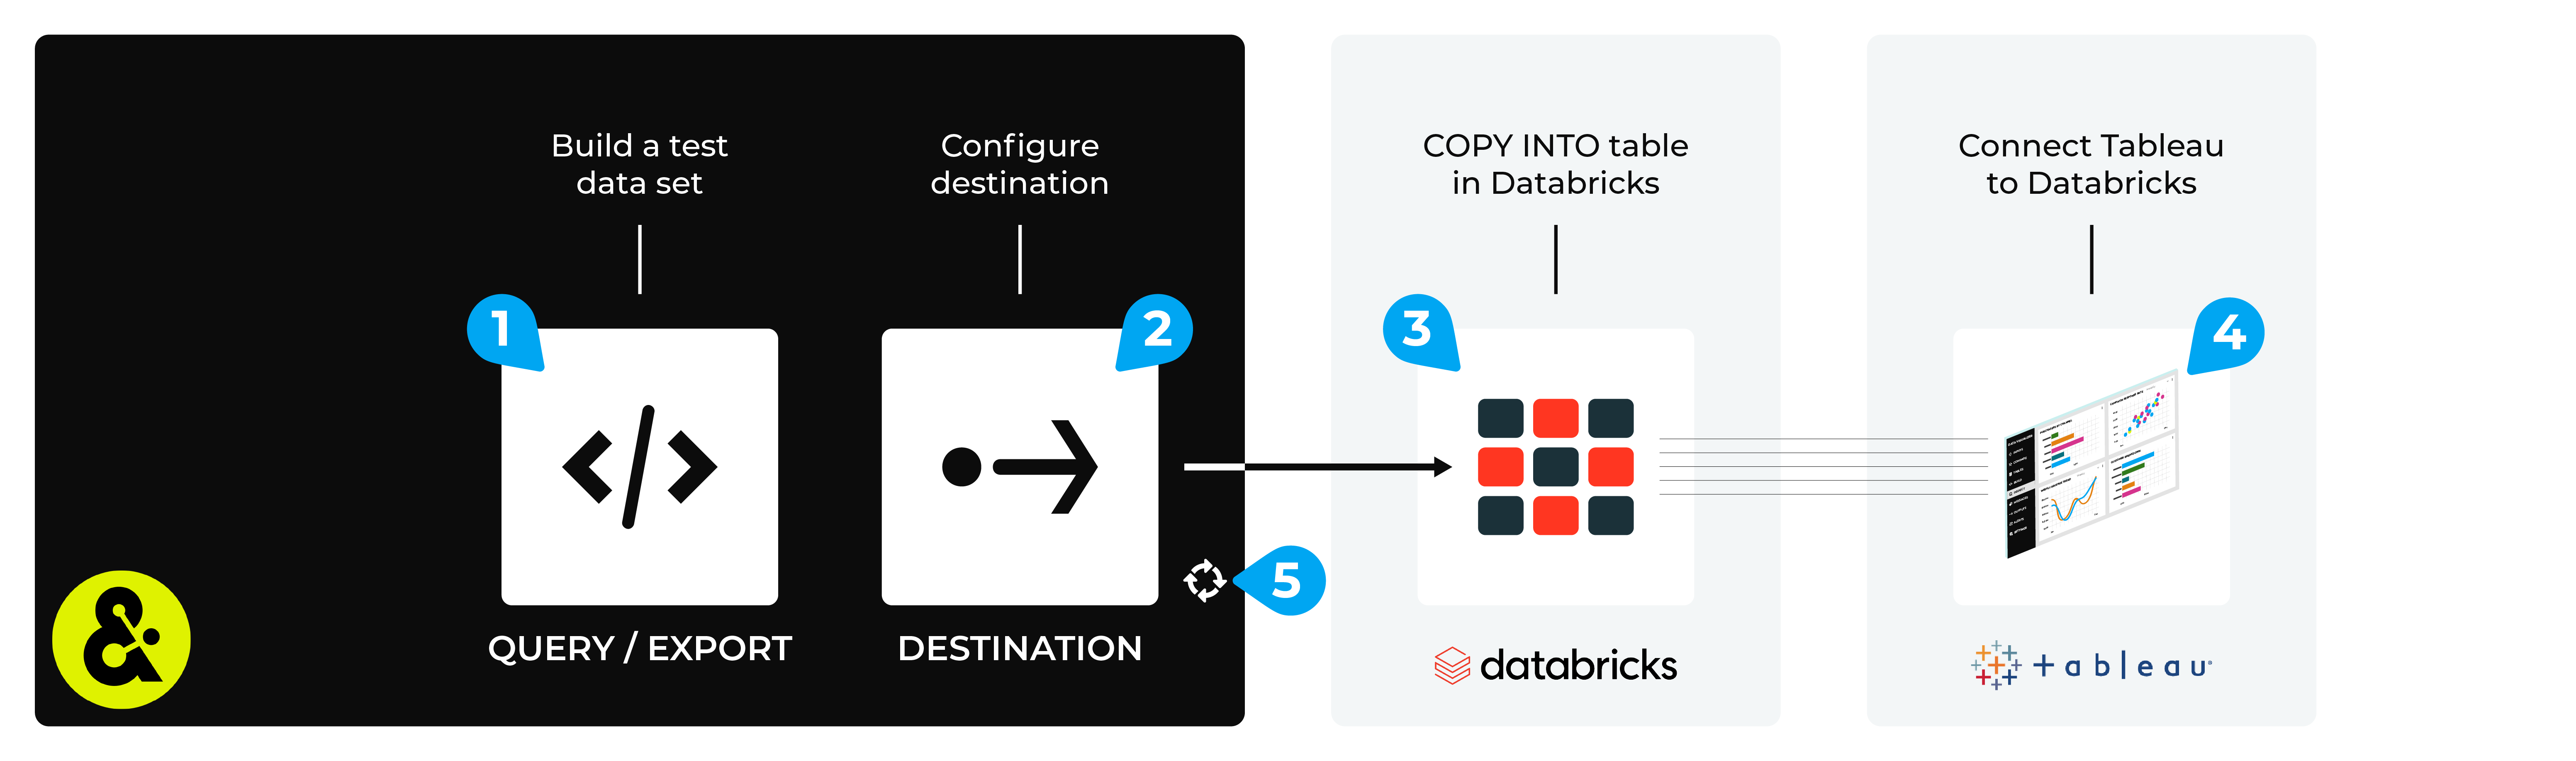 Connect Tableau to Databricks.